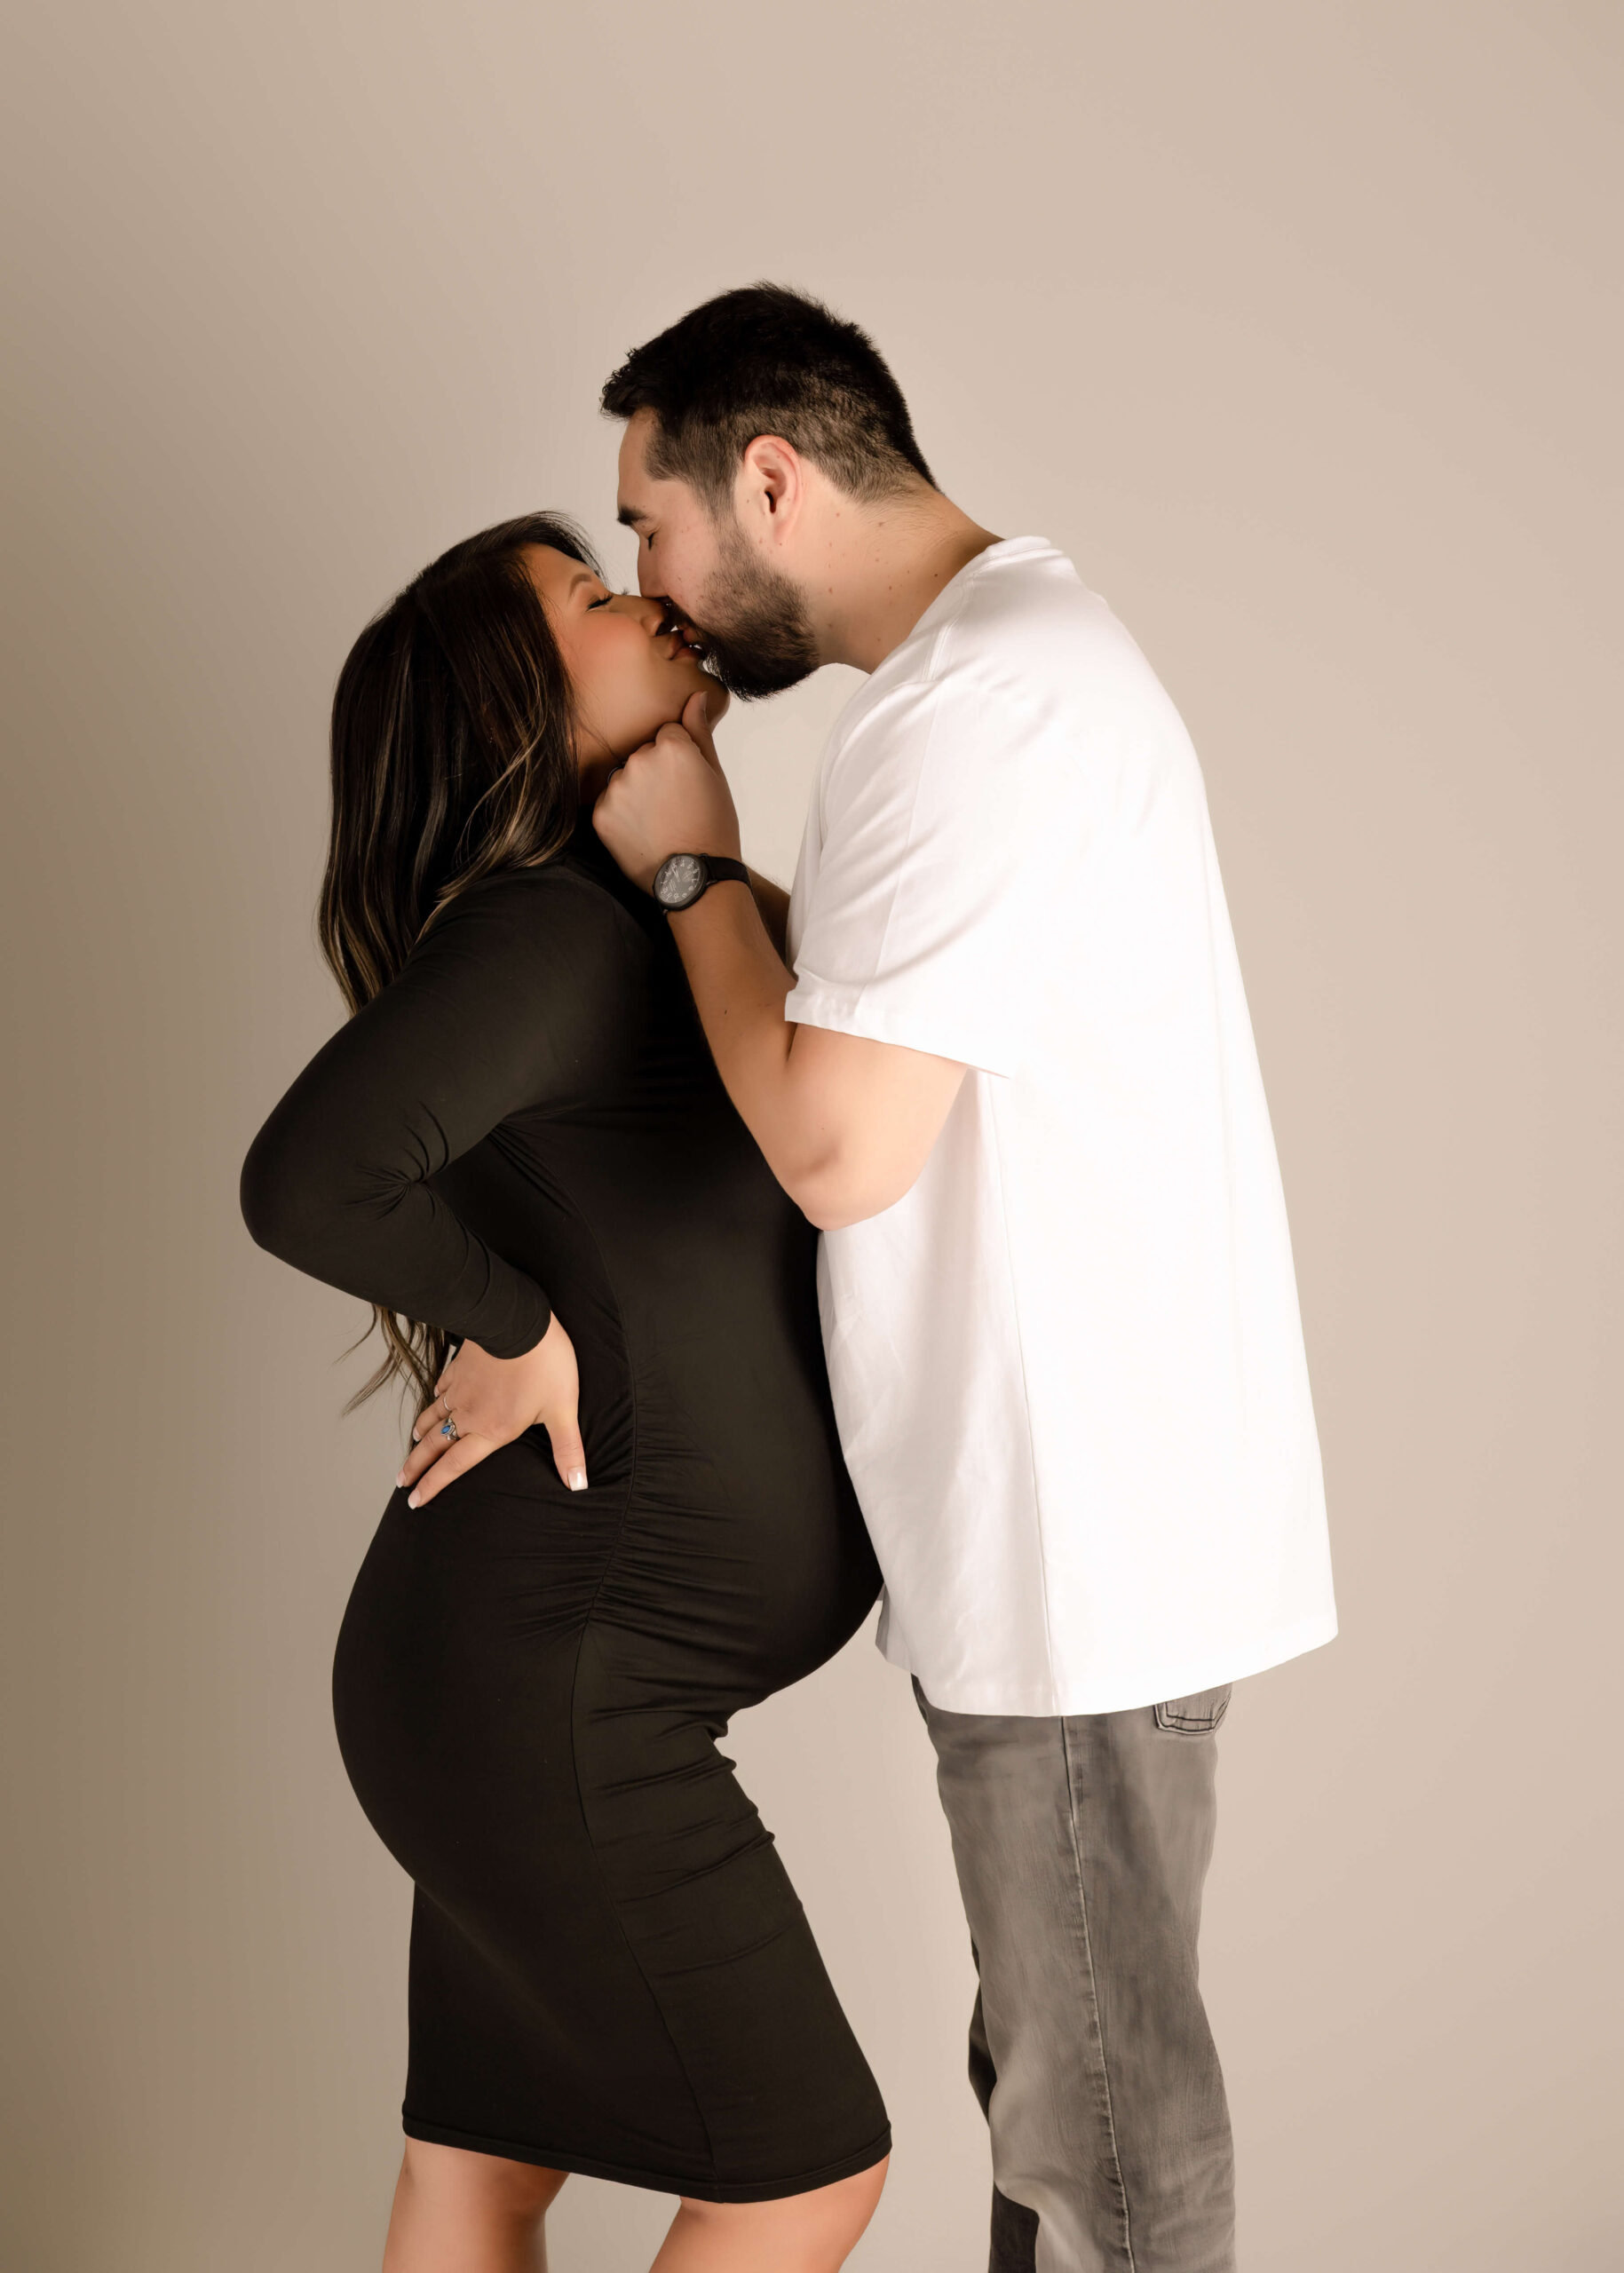 Husband kissing wife while holding her chin at their maternity session.